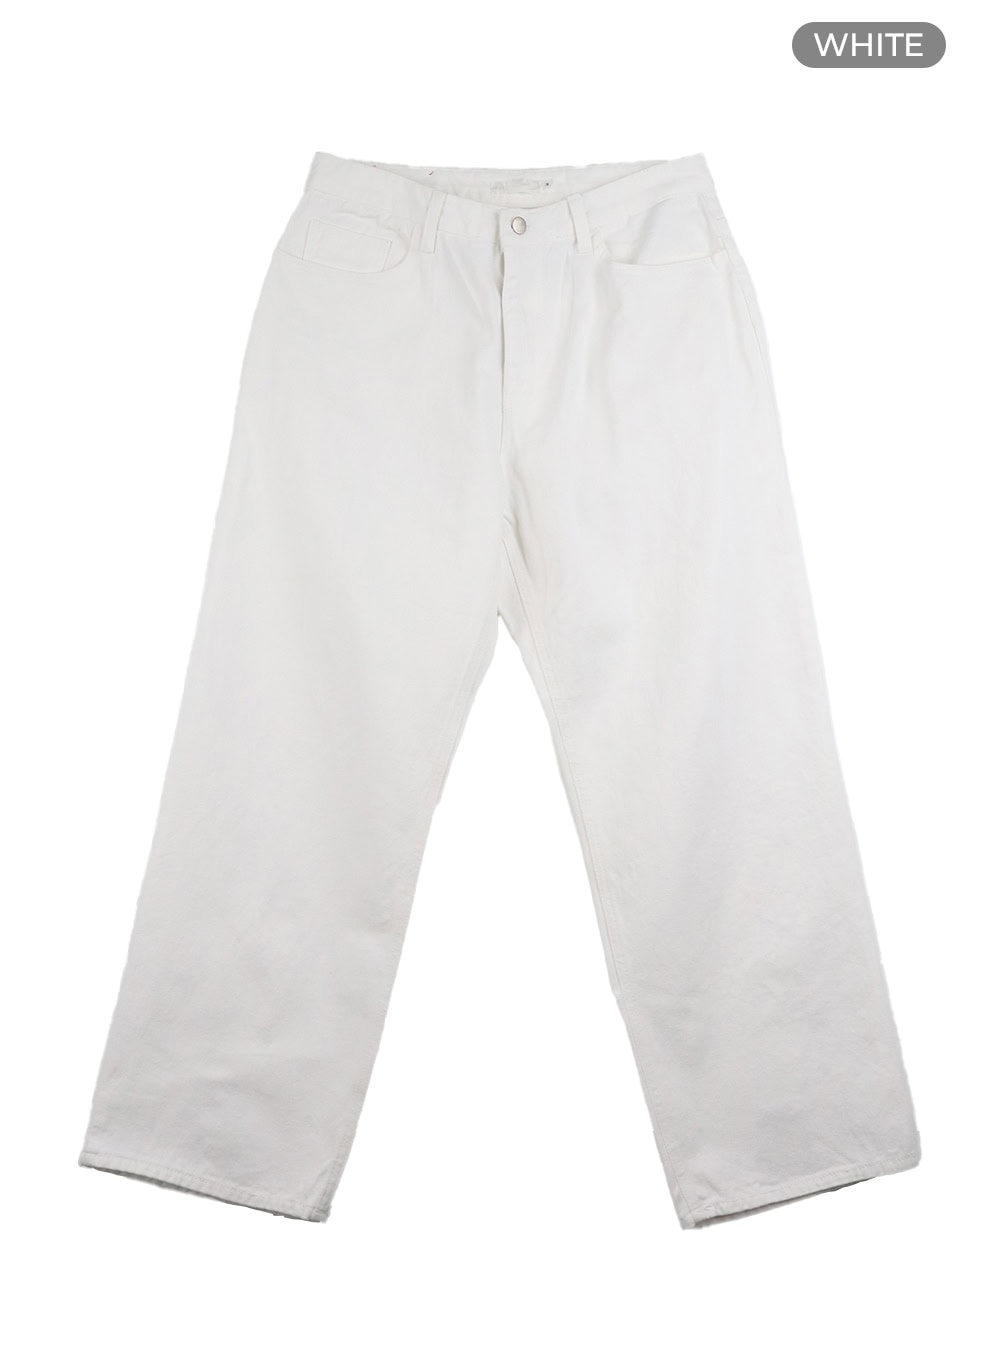 mens-cotton-wide-fit-pants-iy402 / White